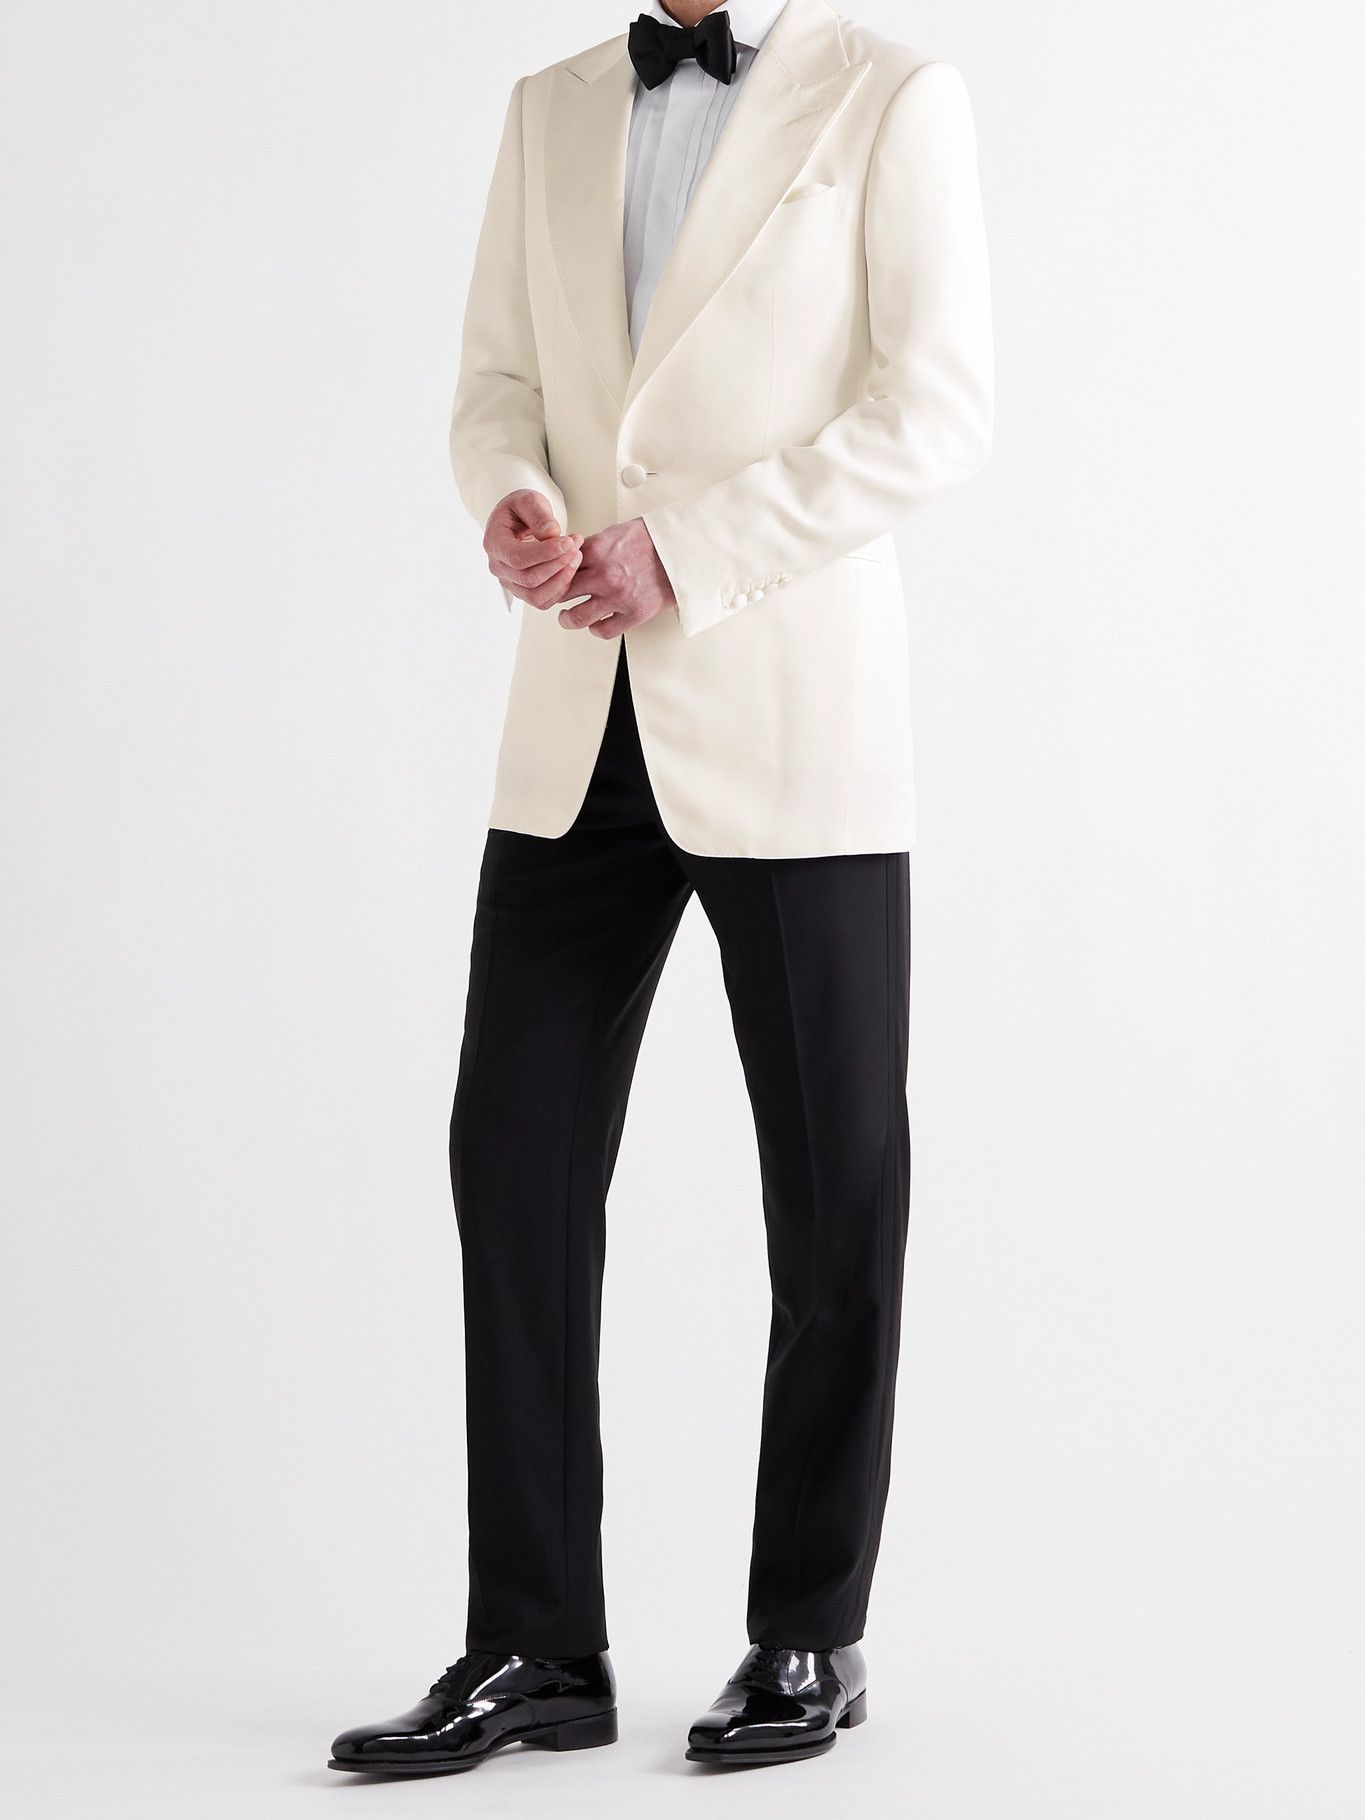 TOM FORD - Atticus Satin-Trimmed Twill Tuxedo Jackt - White TOM FORD